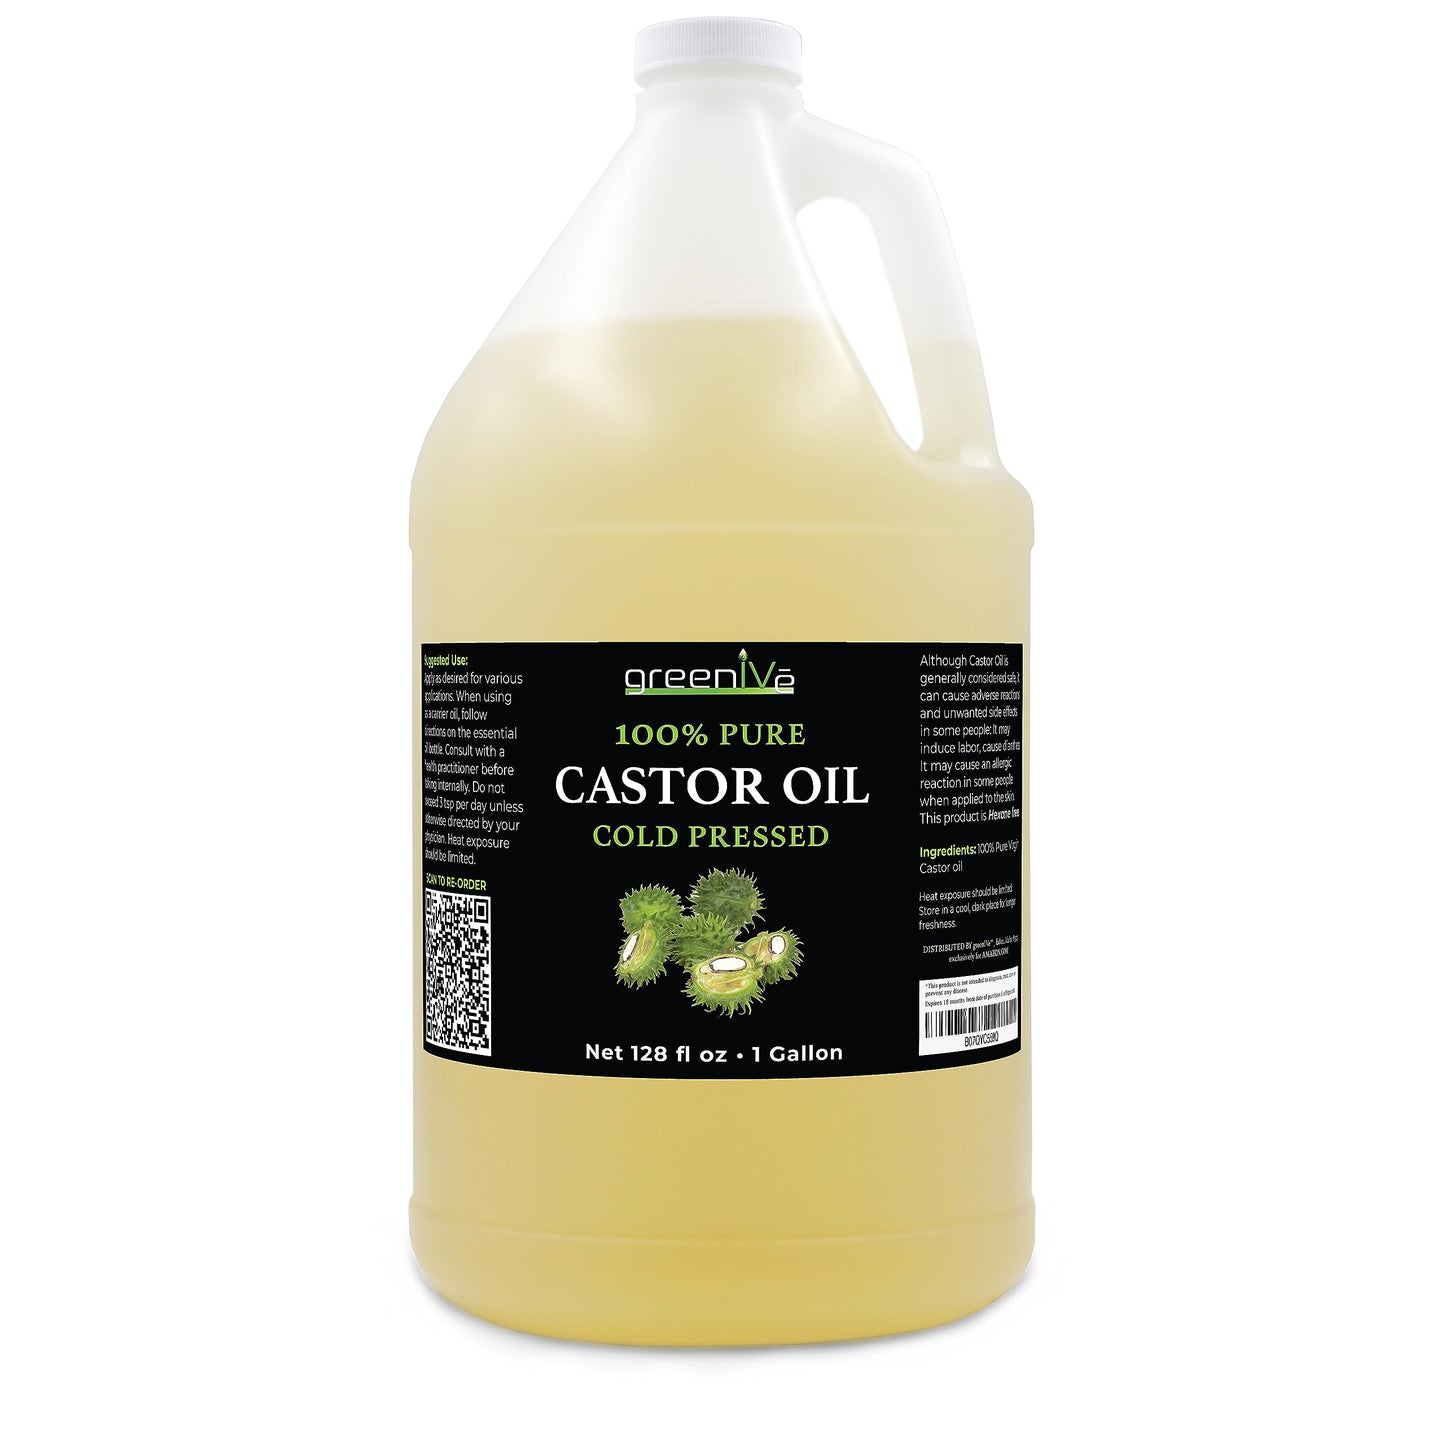 GreenIVe - 100% Pure Castor Oil - Cold Pressed - Hexane Free - Exclusively on Amazon (128 Ounce (1 Gallon))